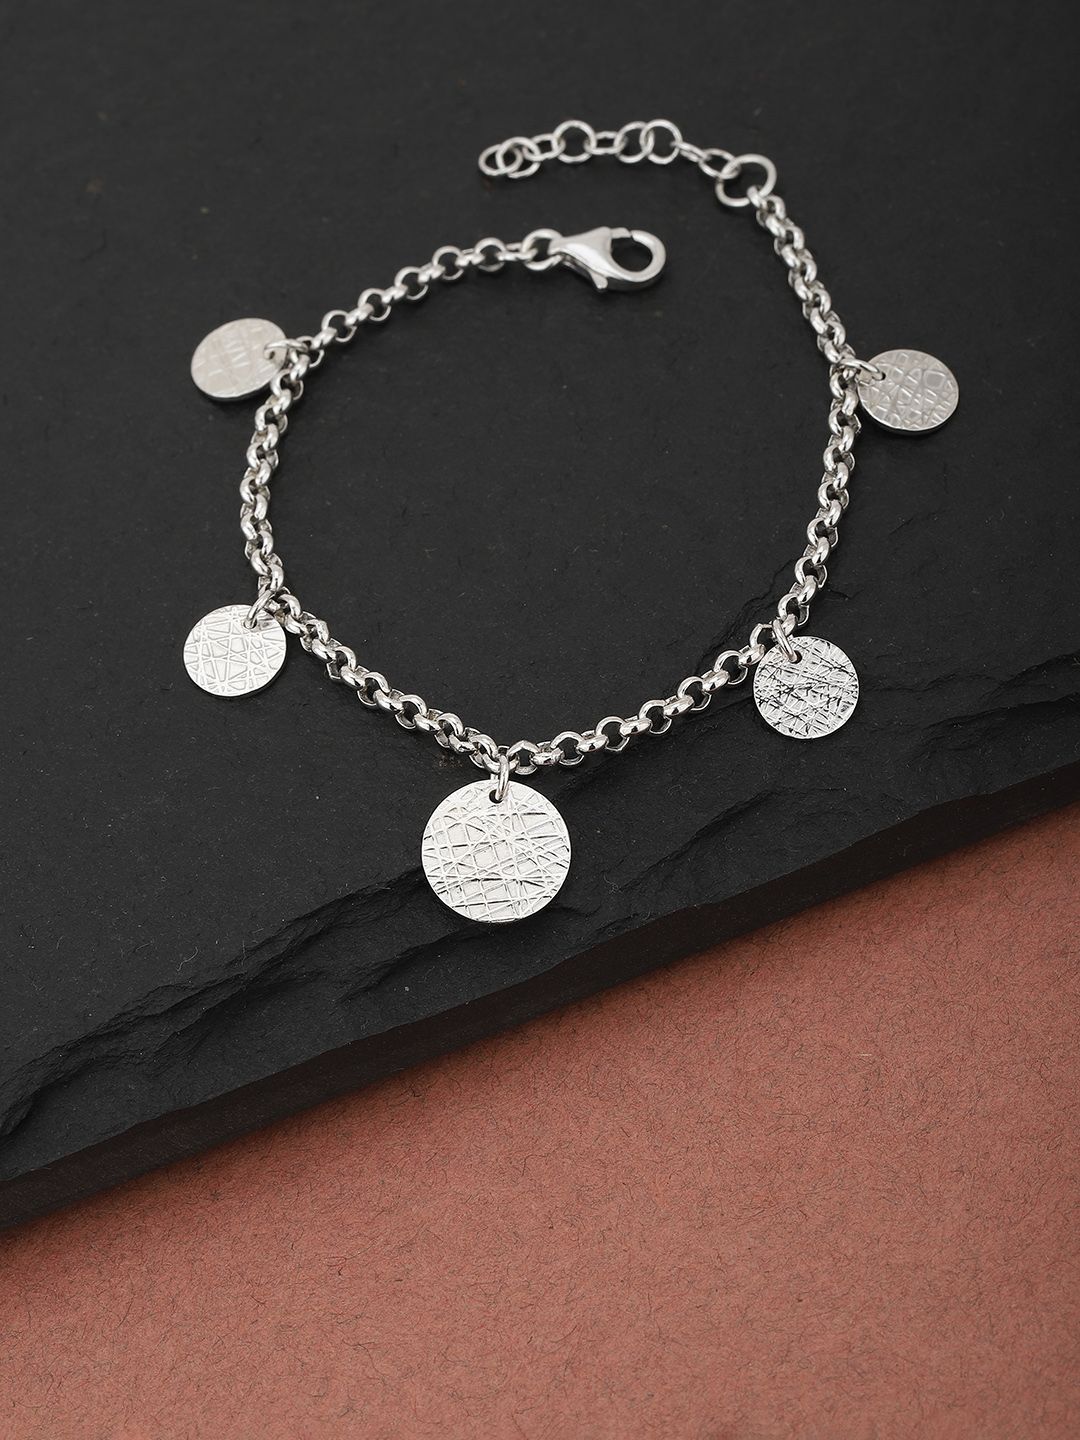 Carlton London Silver-Toned Rhodium-Plated Charm Bracelet Price in India